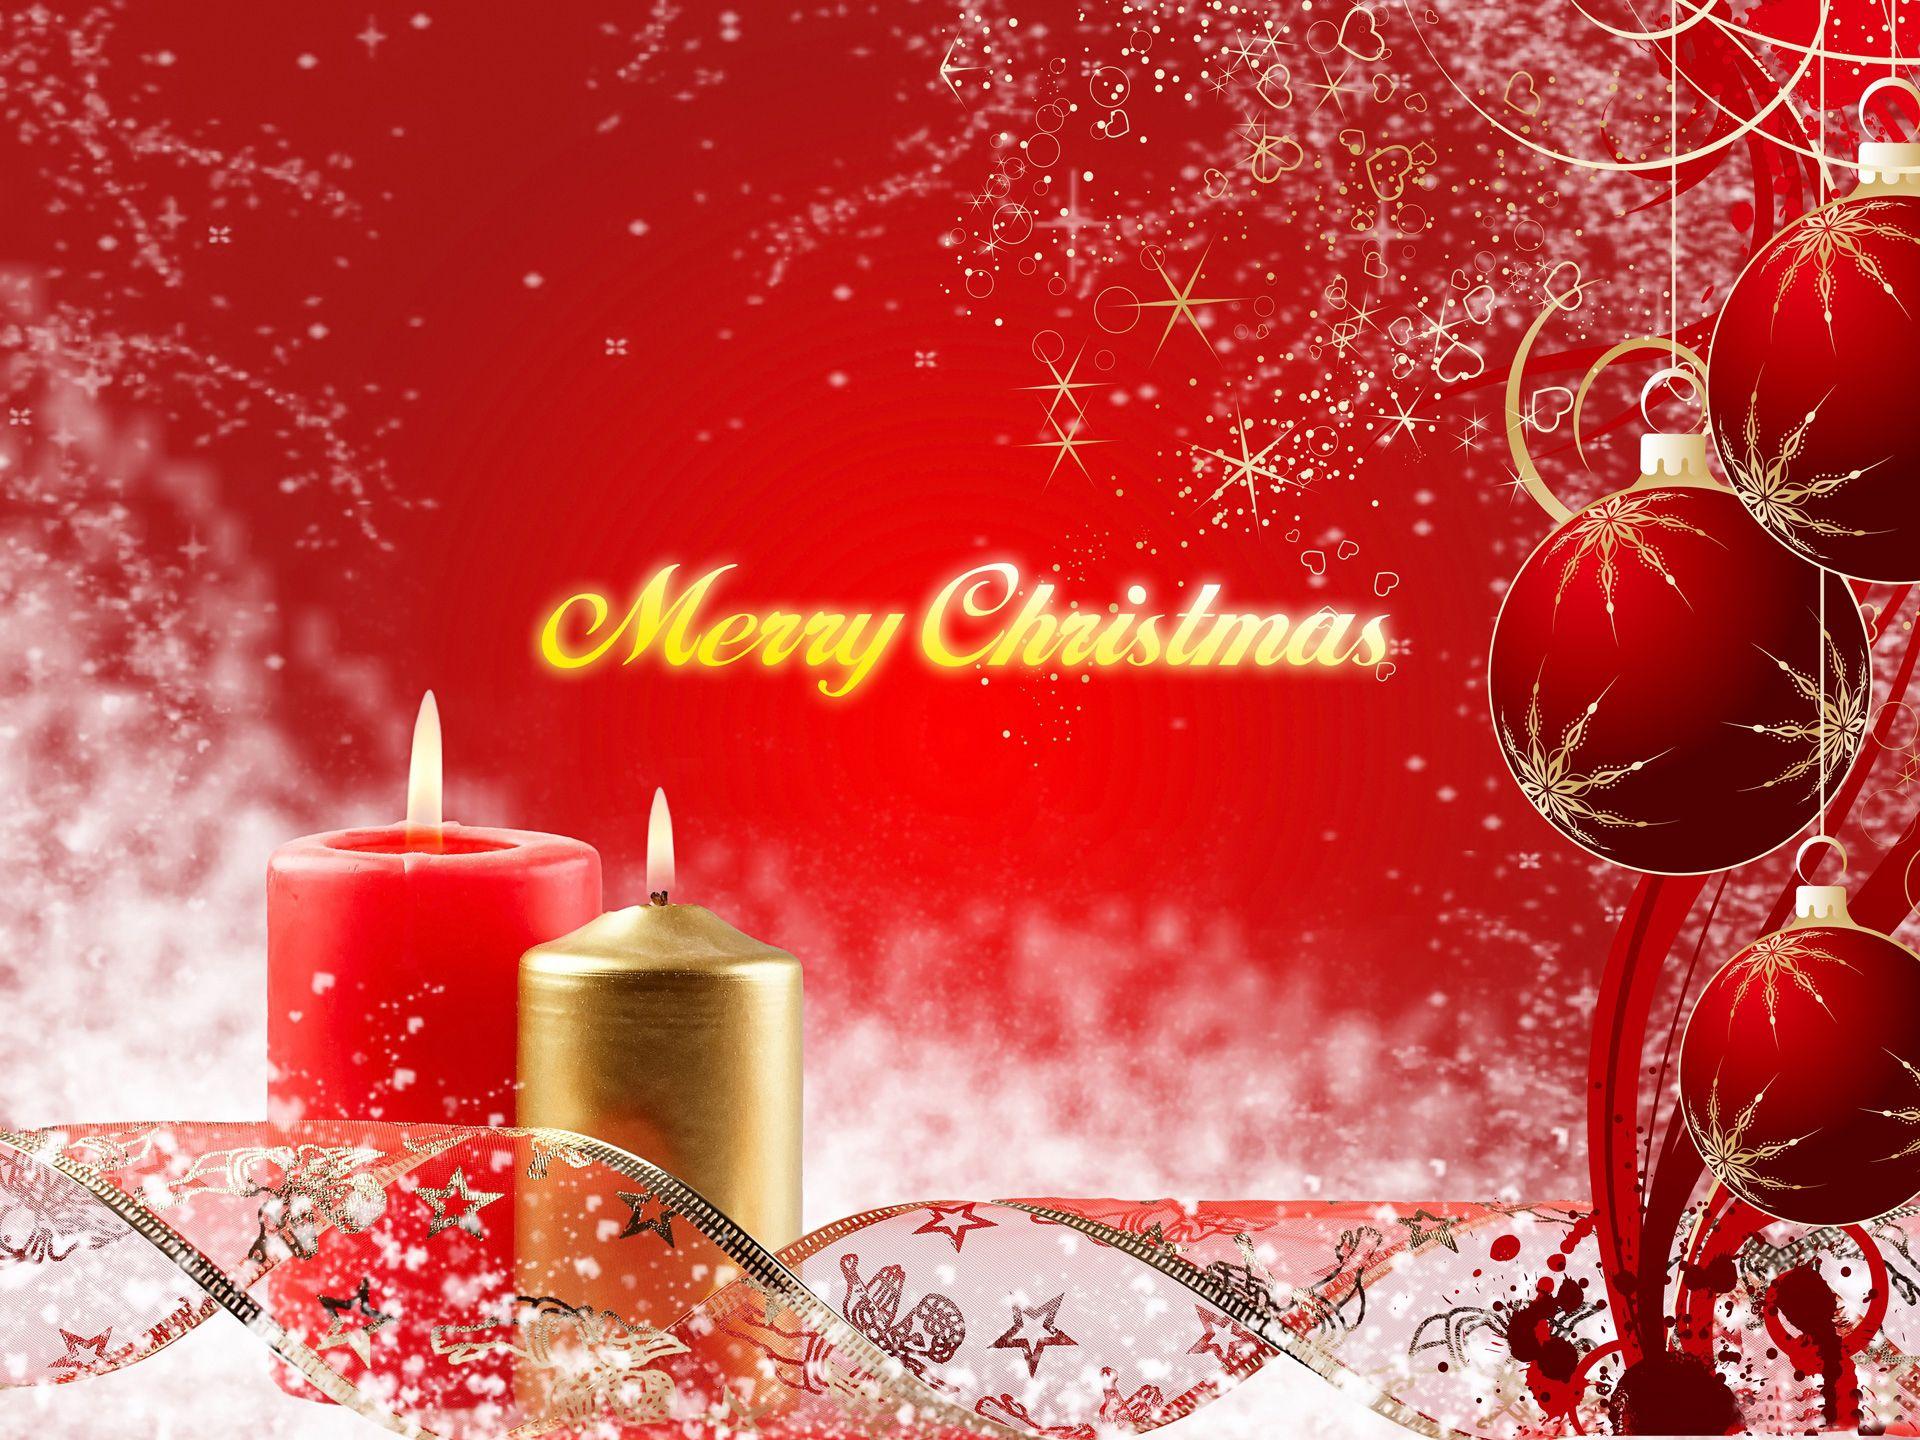 Merry Christmas Wishes Free Hd Wallappers For Tablets